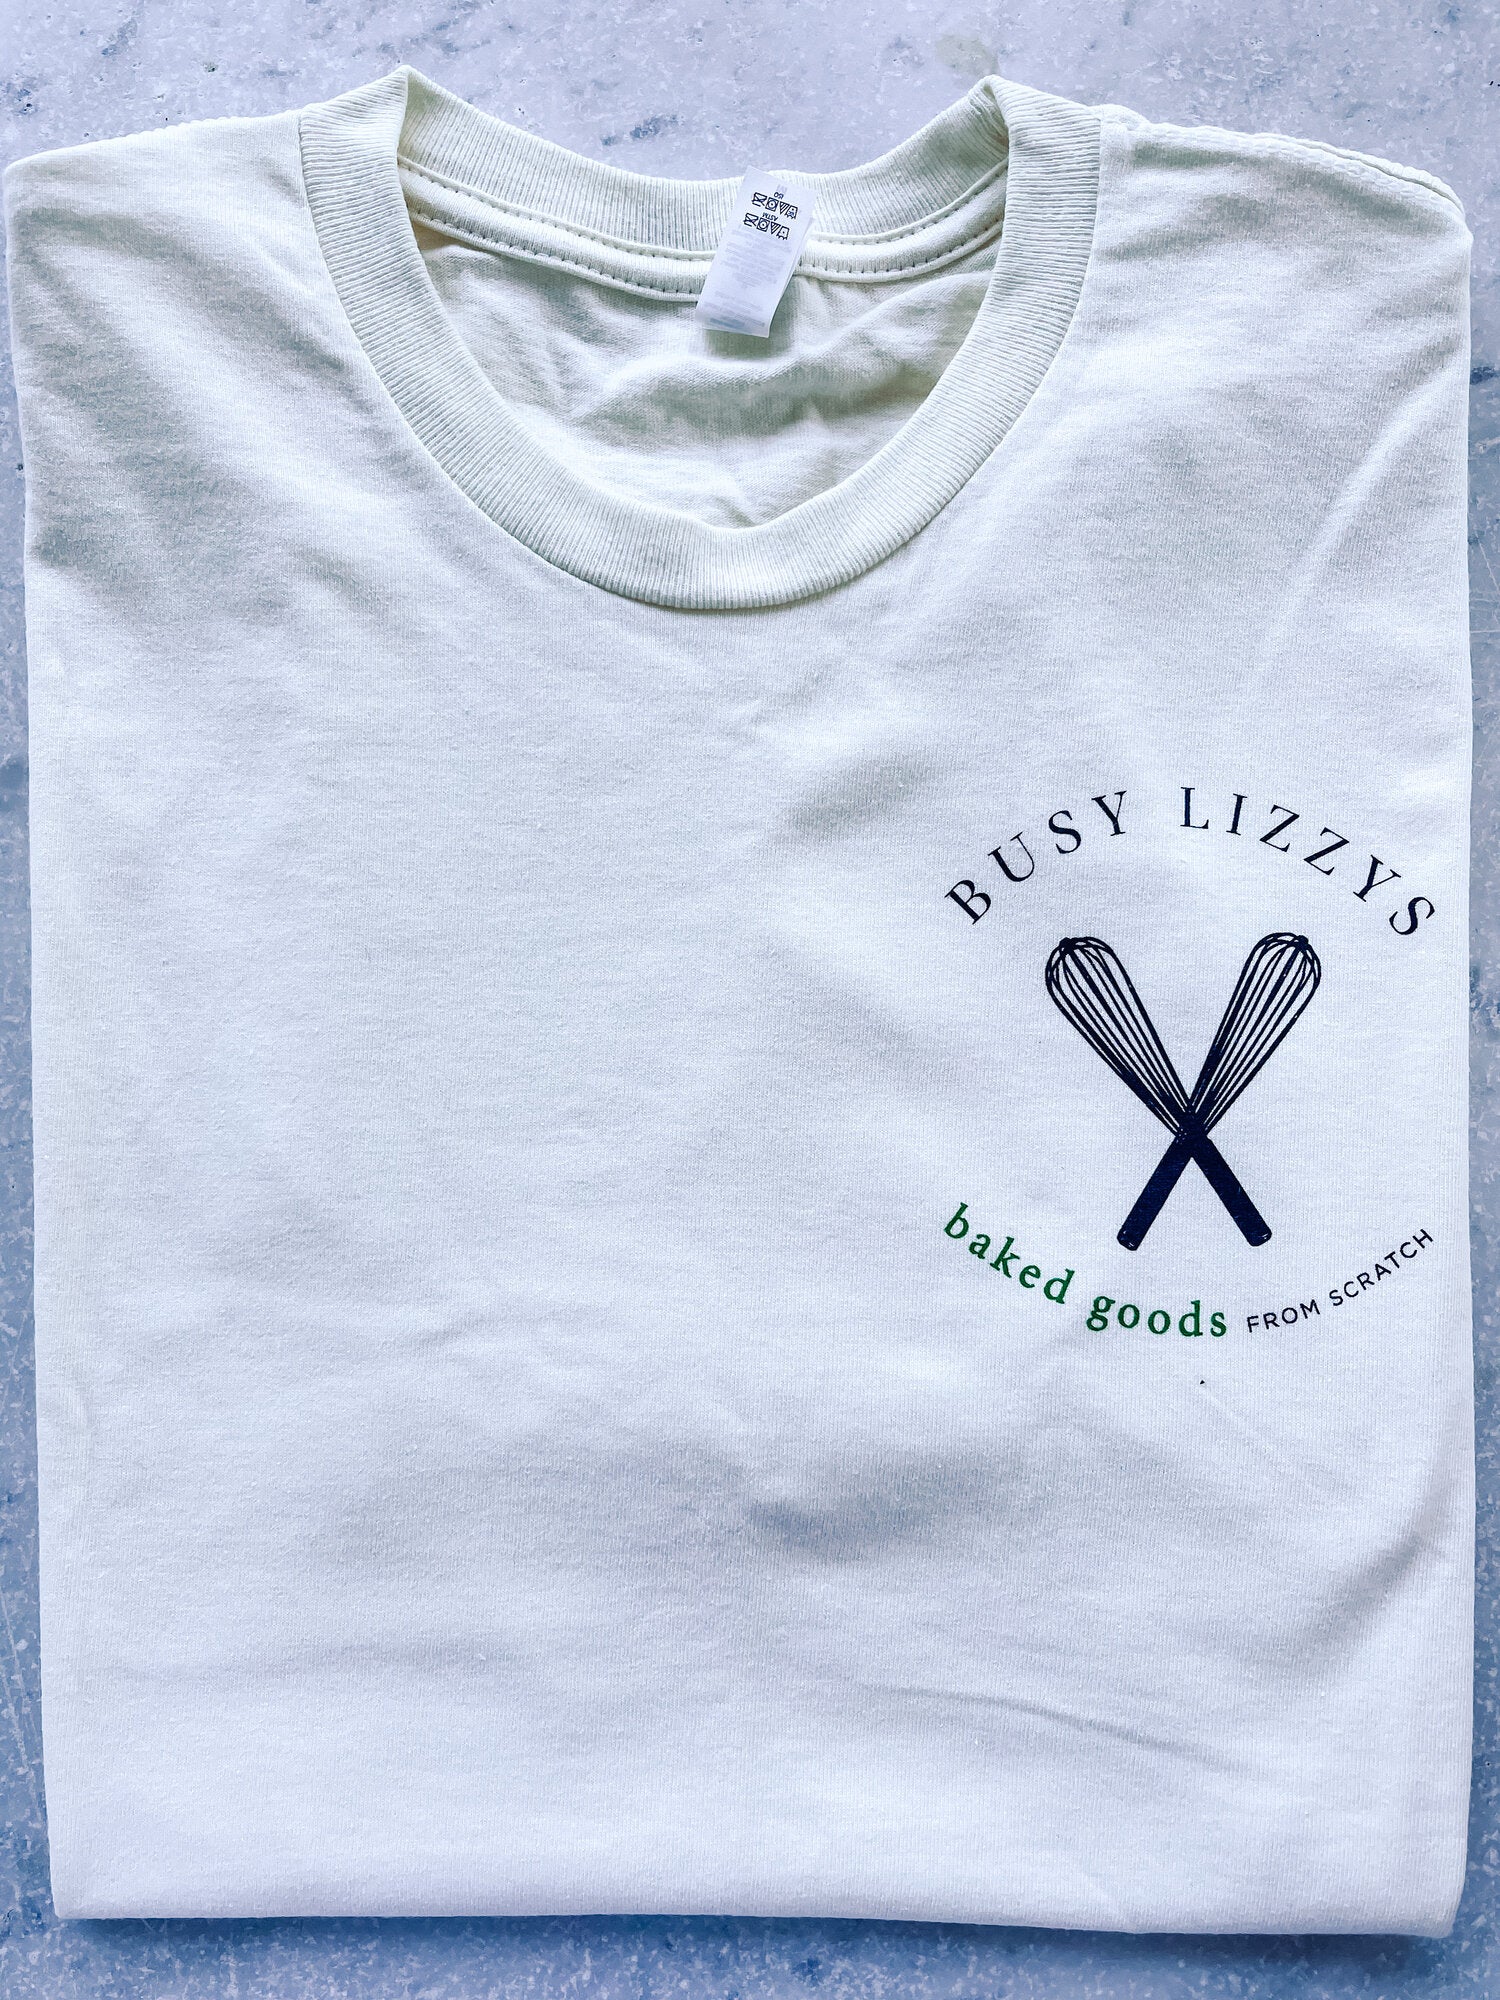 Busy Lizzy T-Shirt